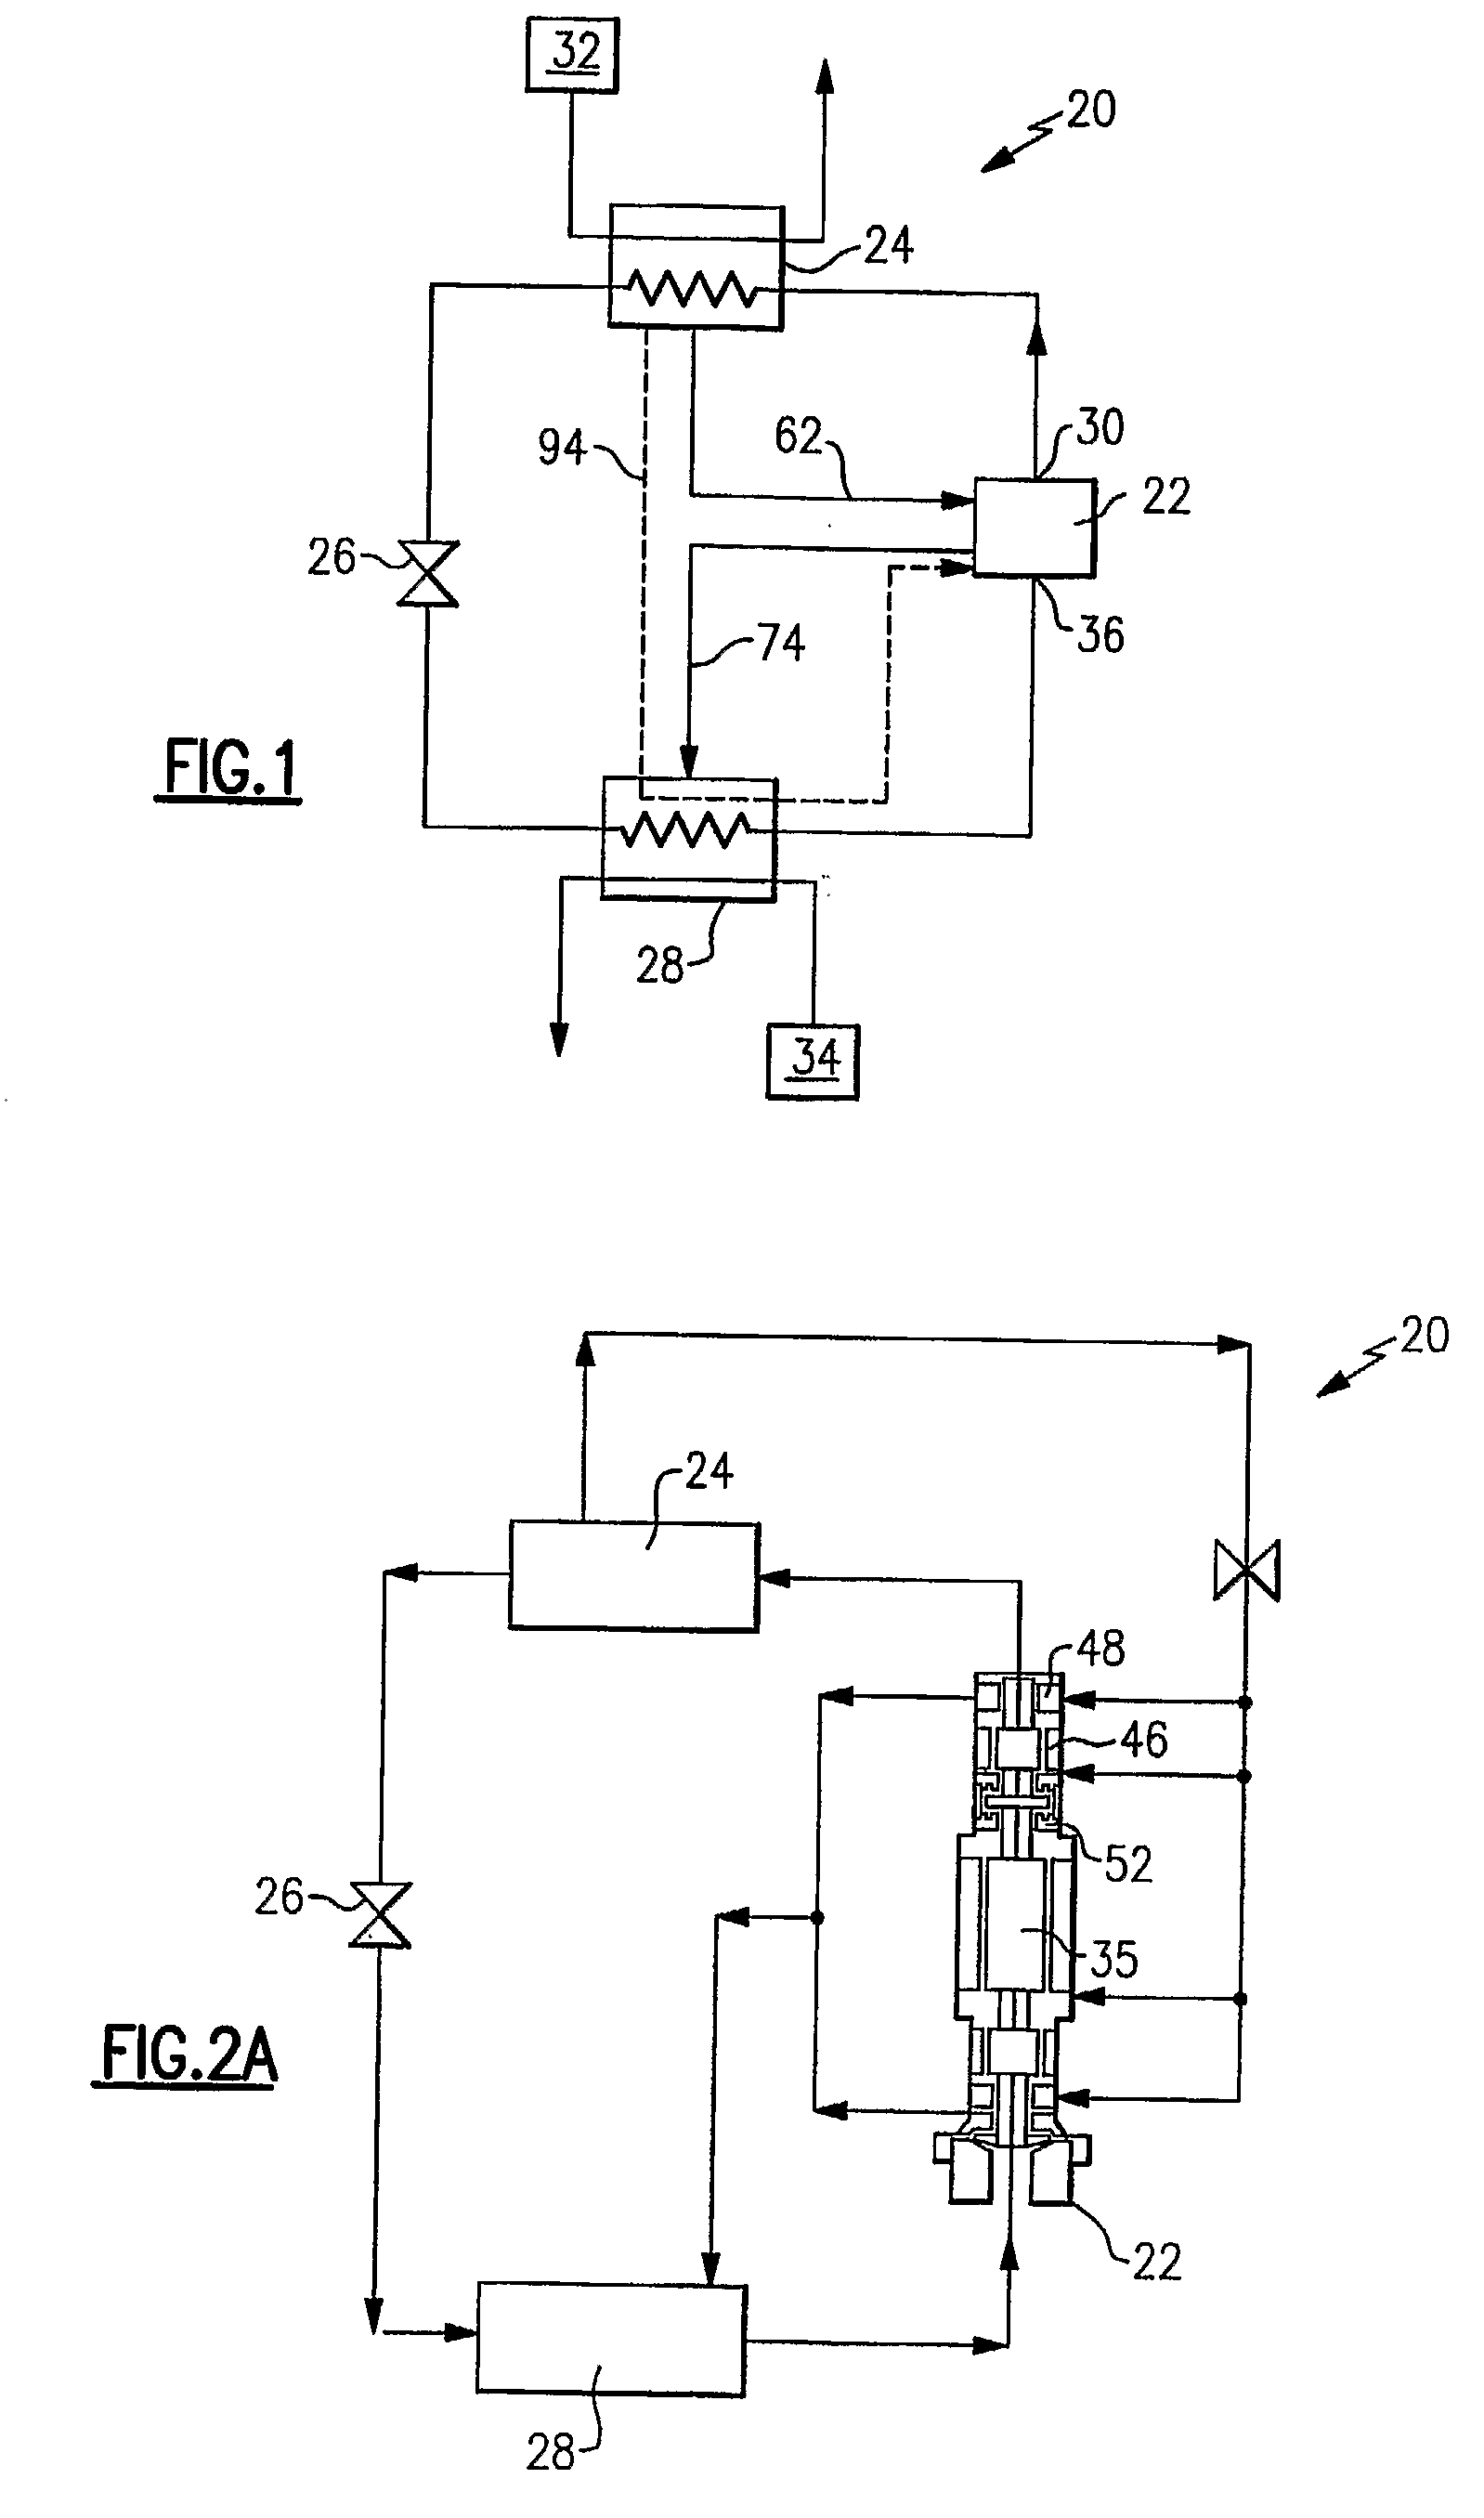 Lubrication System for Touchdown Bearings of a Magnetic Bearing Compressor